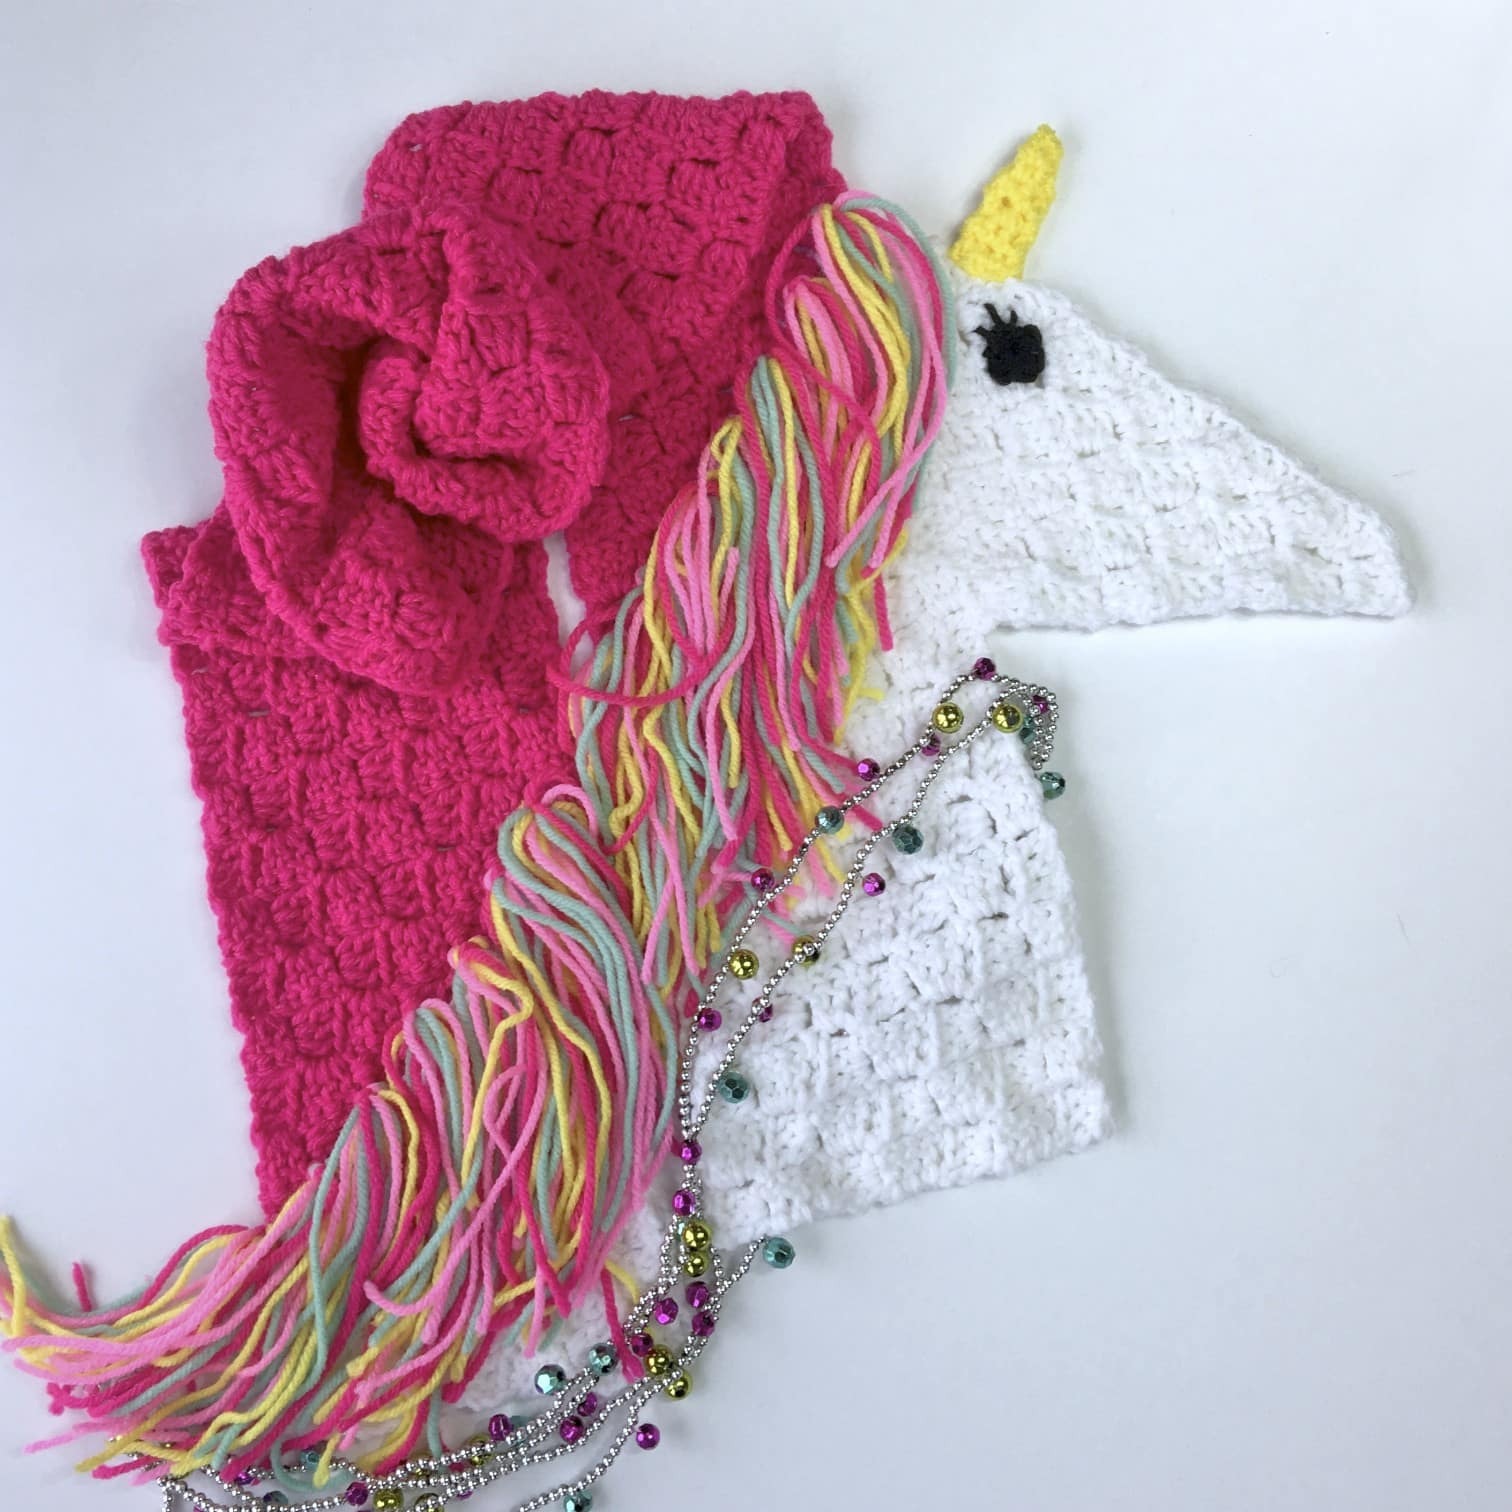 Unicorn Scarf - If you’re looking to learn a new crochet skill, check out these 12 corner to corner crochet patterns. #cornertocornercrochetpatterns #C2Ccrochetpatterns #crochetpatterns